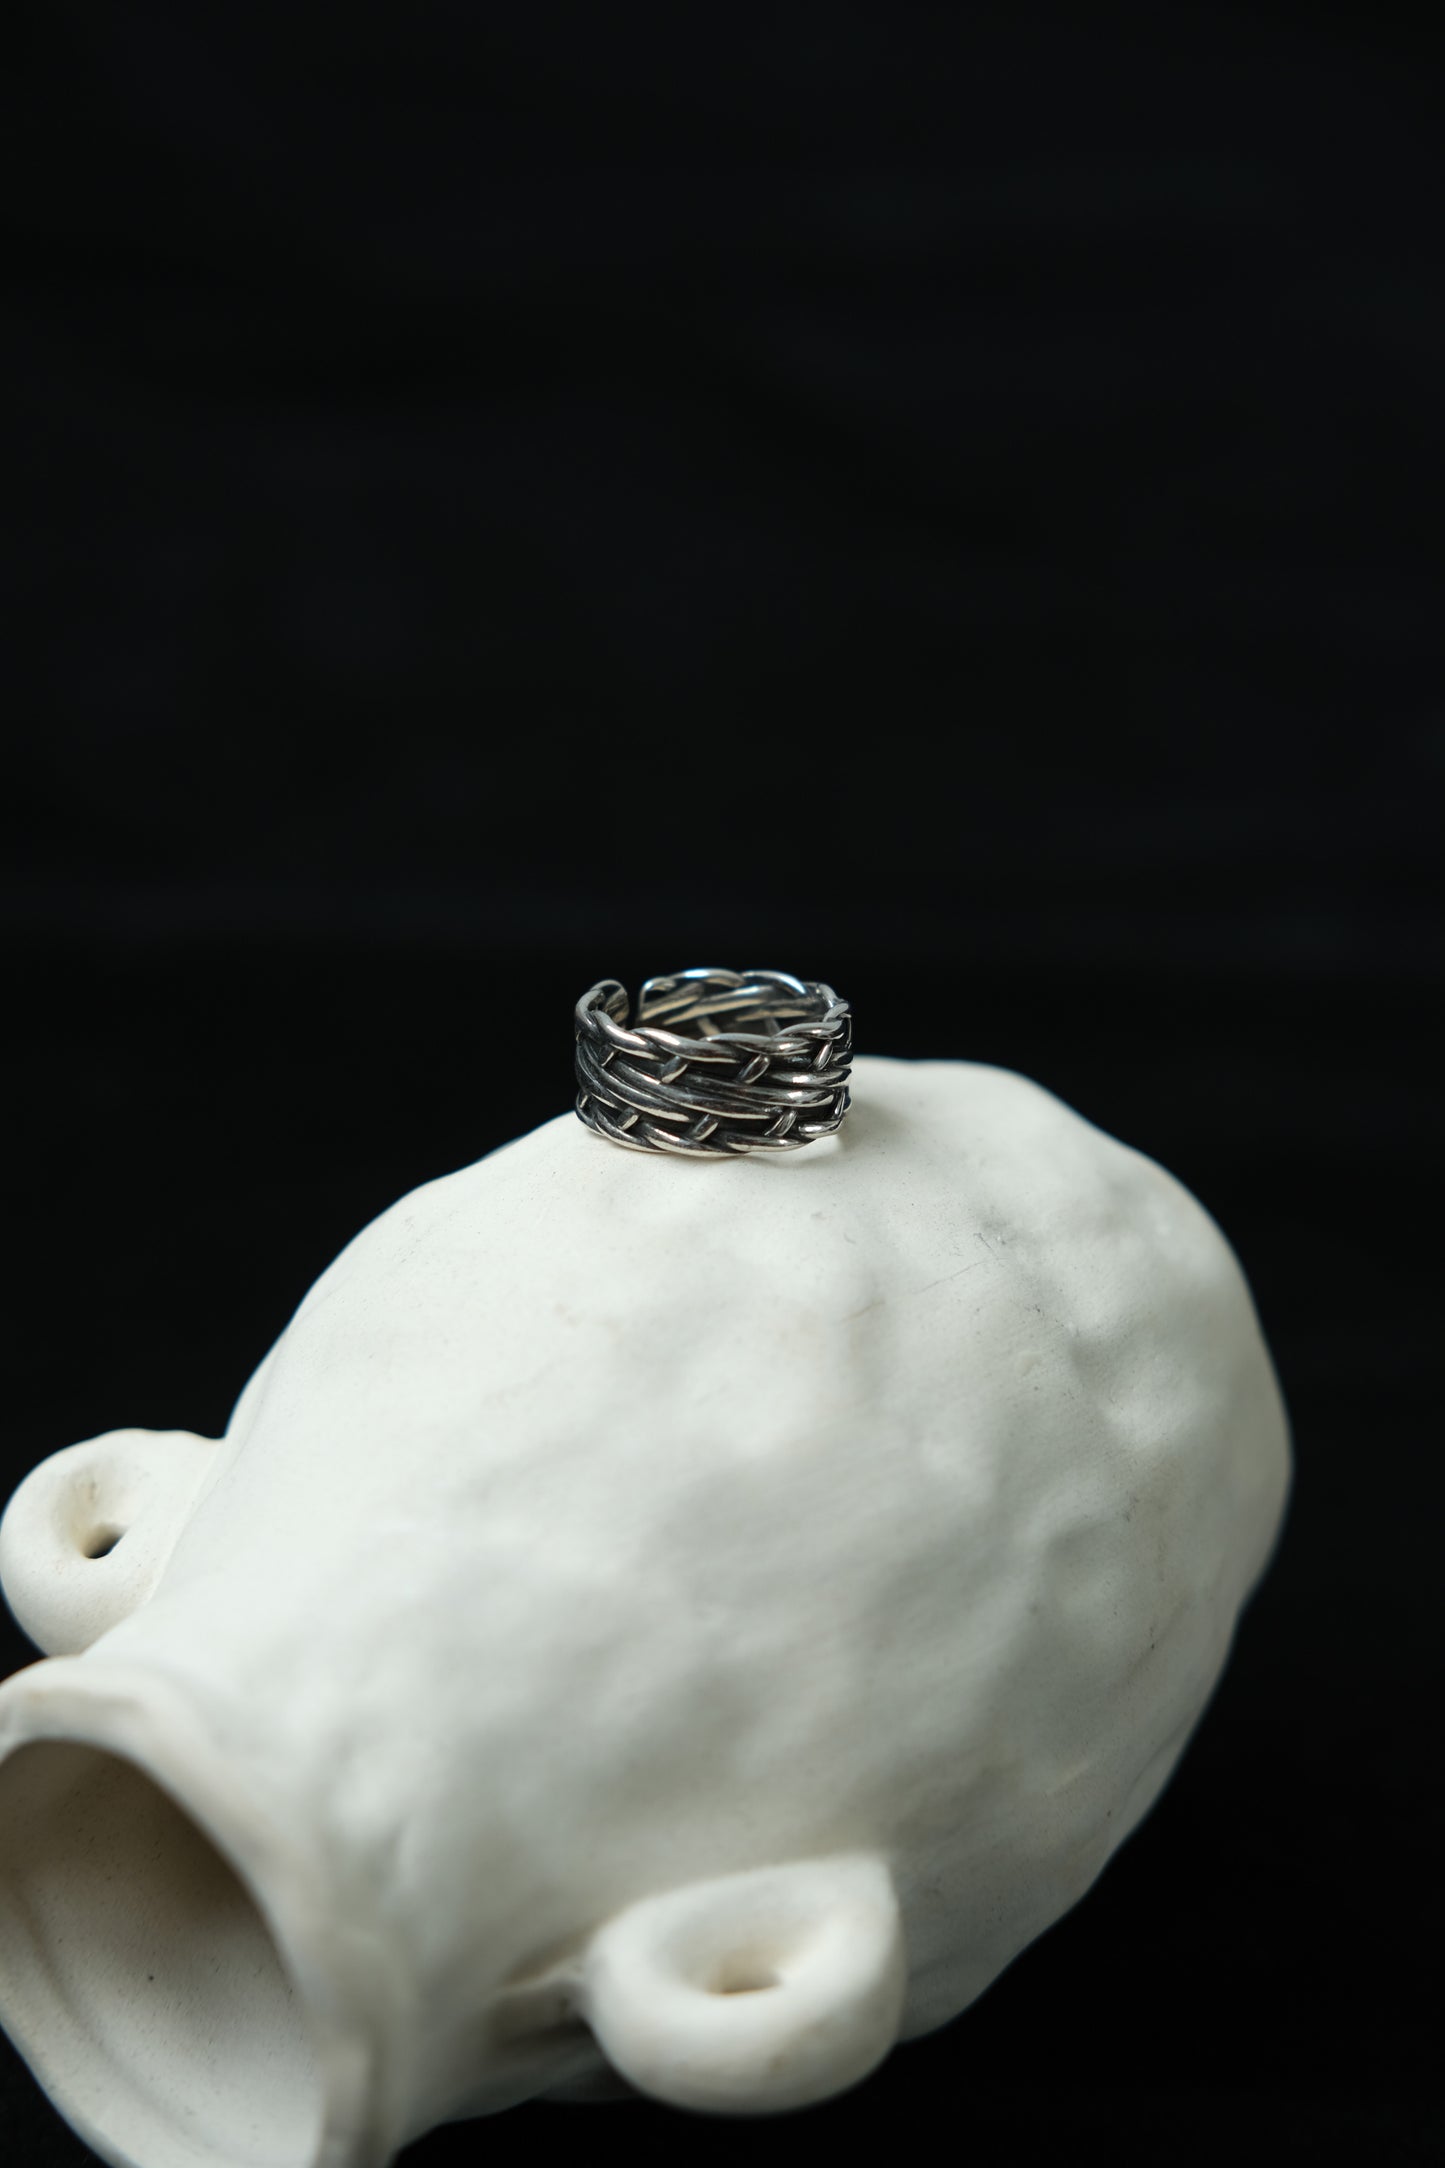 Woven knotted winding cross ring